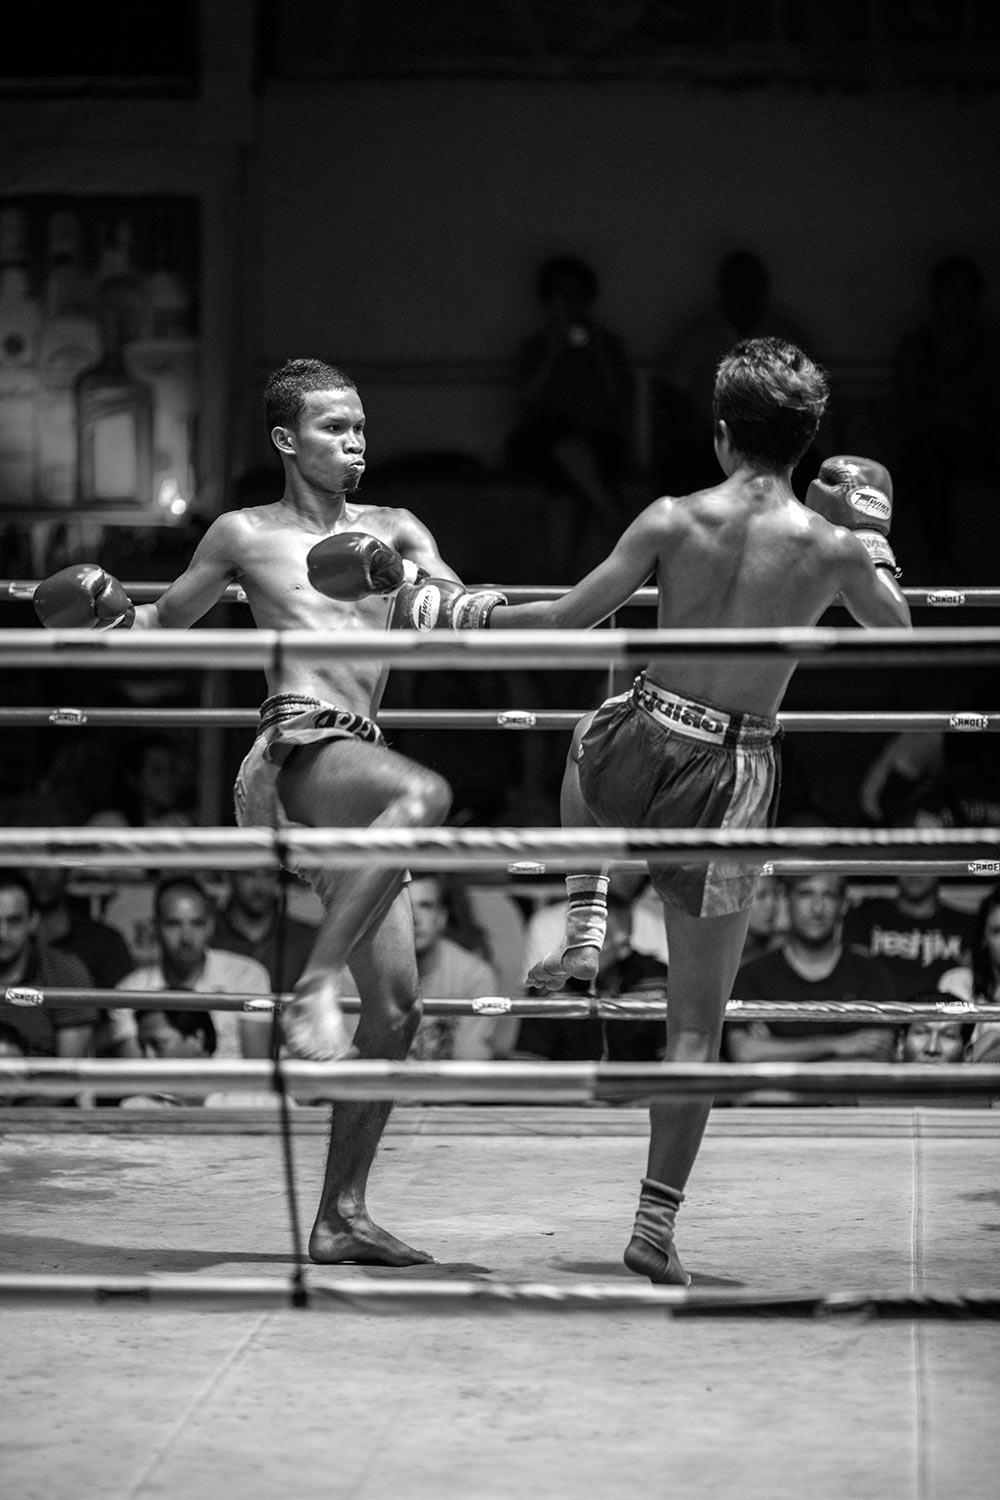 Muay Thai fighters in the rink